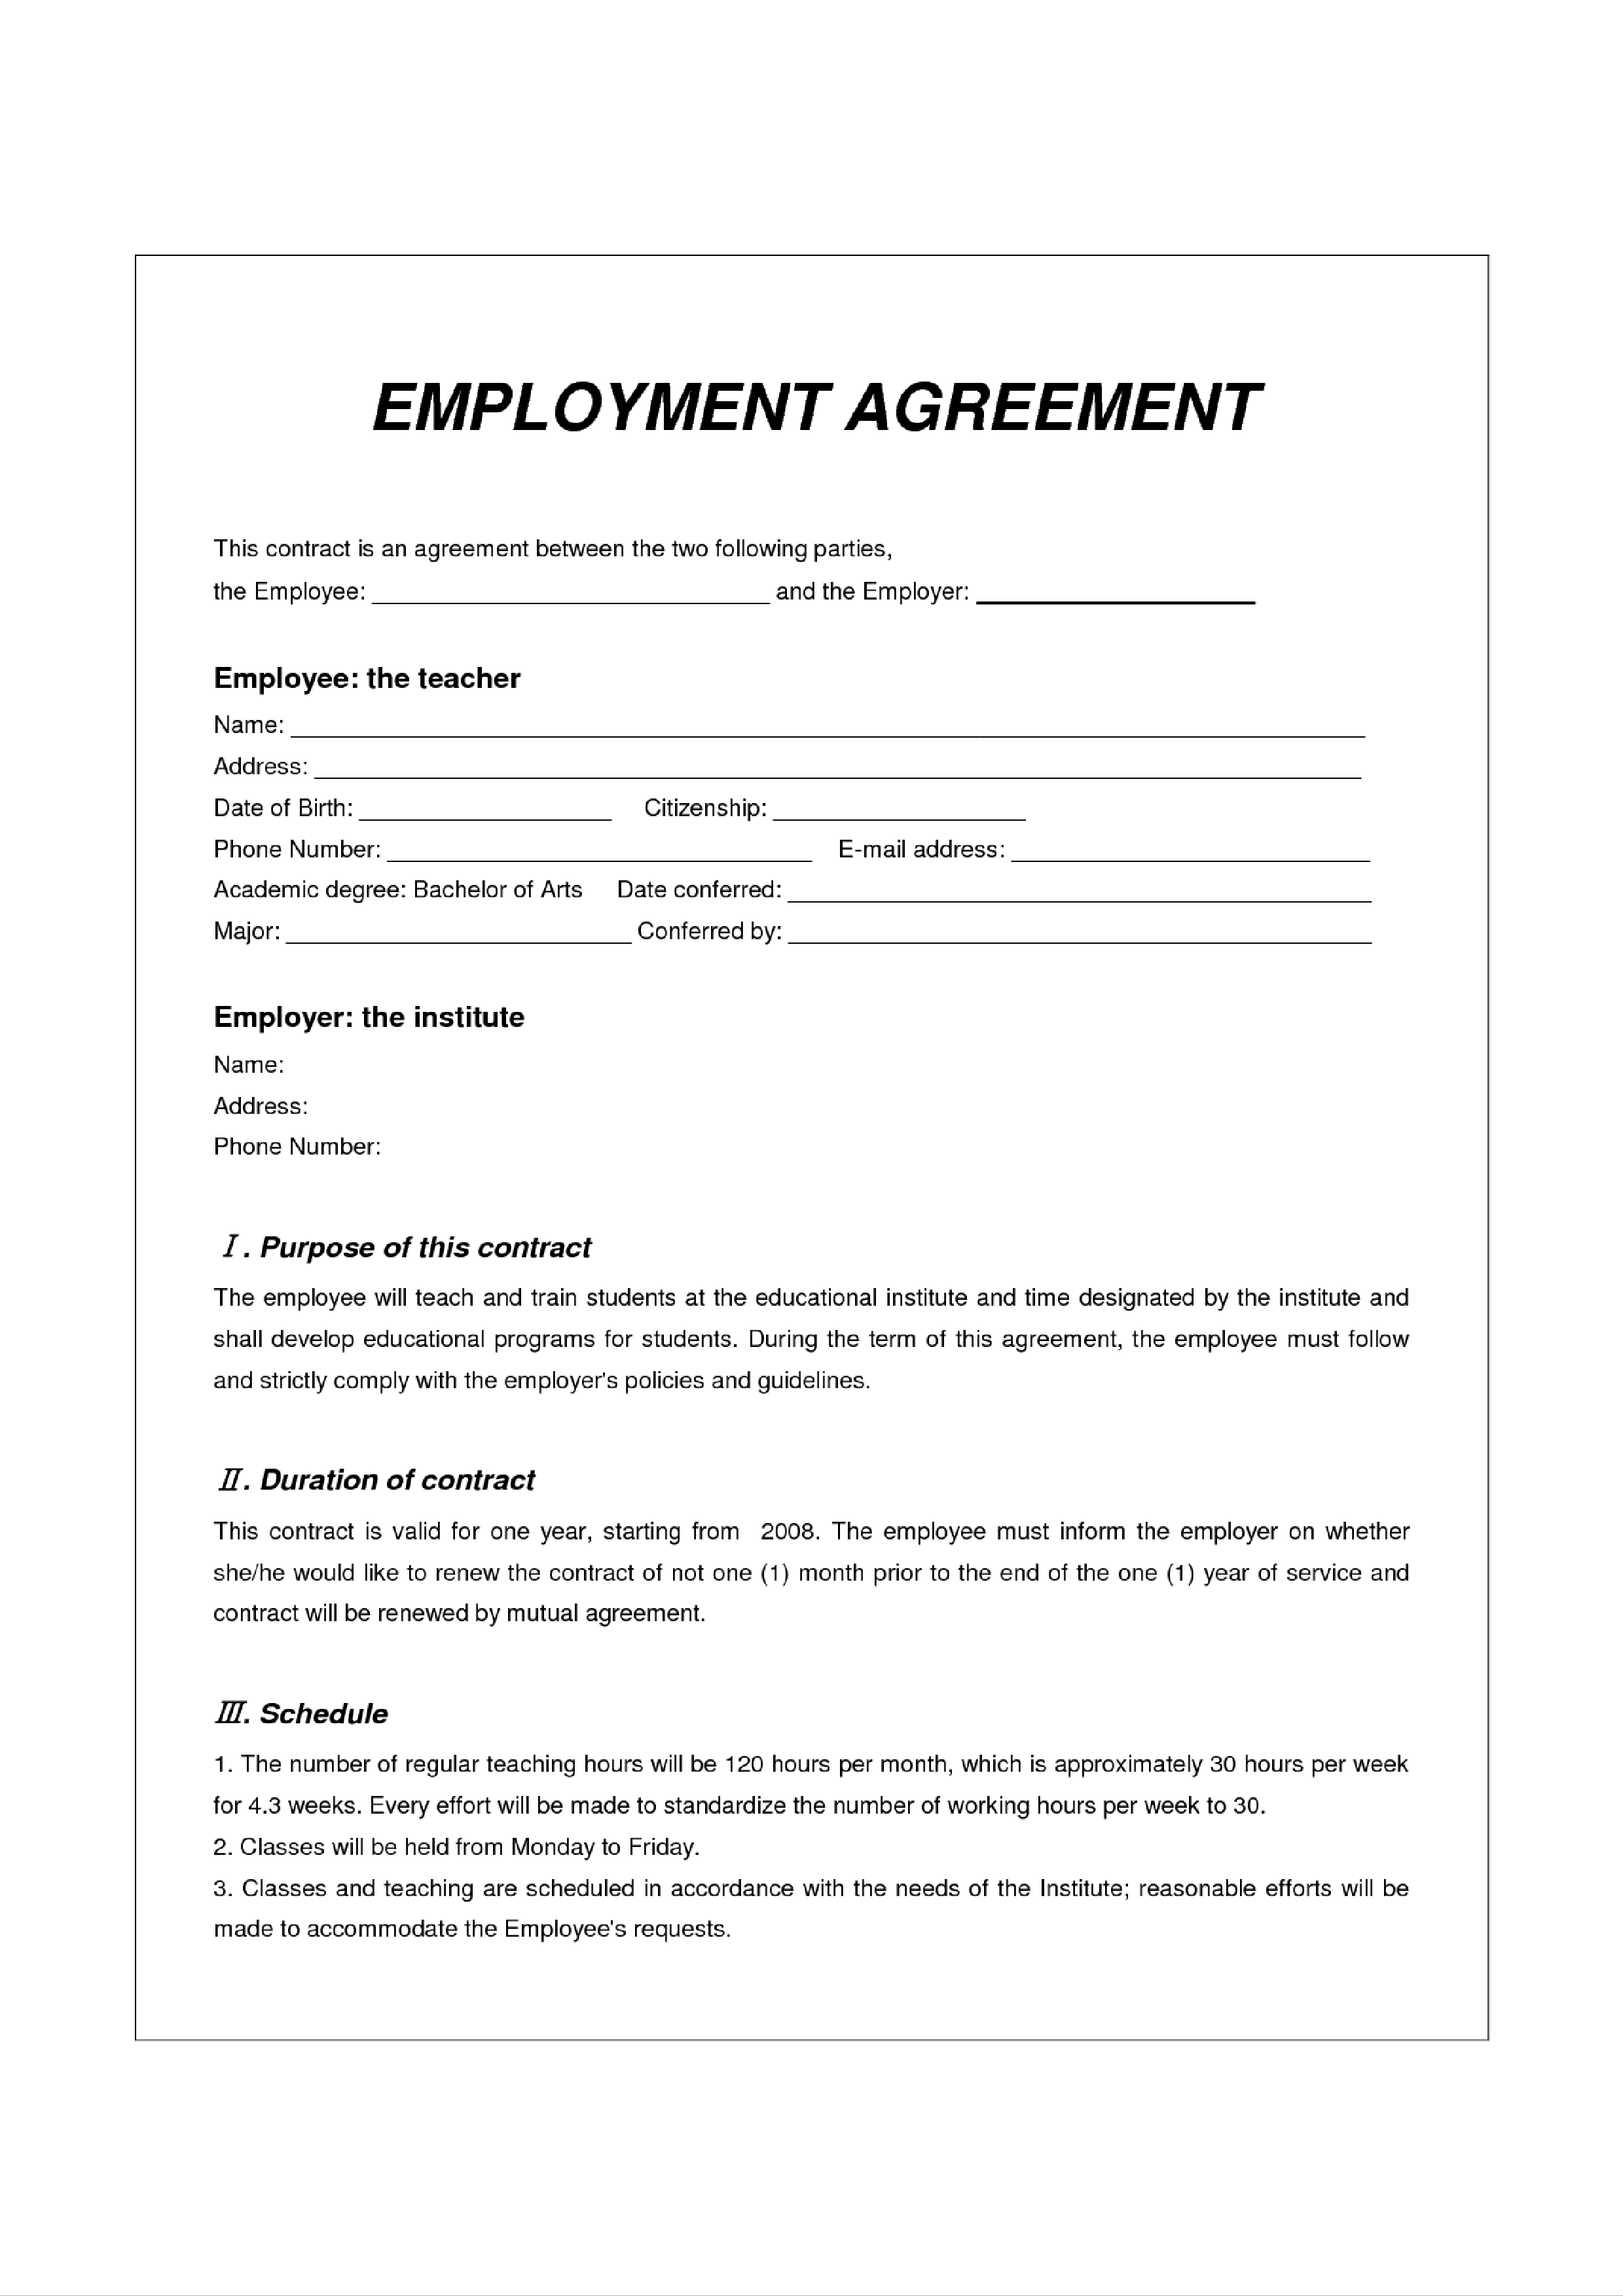 employment agreements cafe template